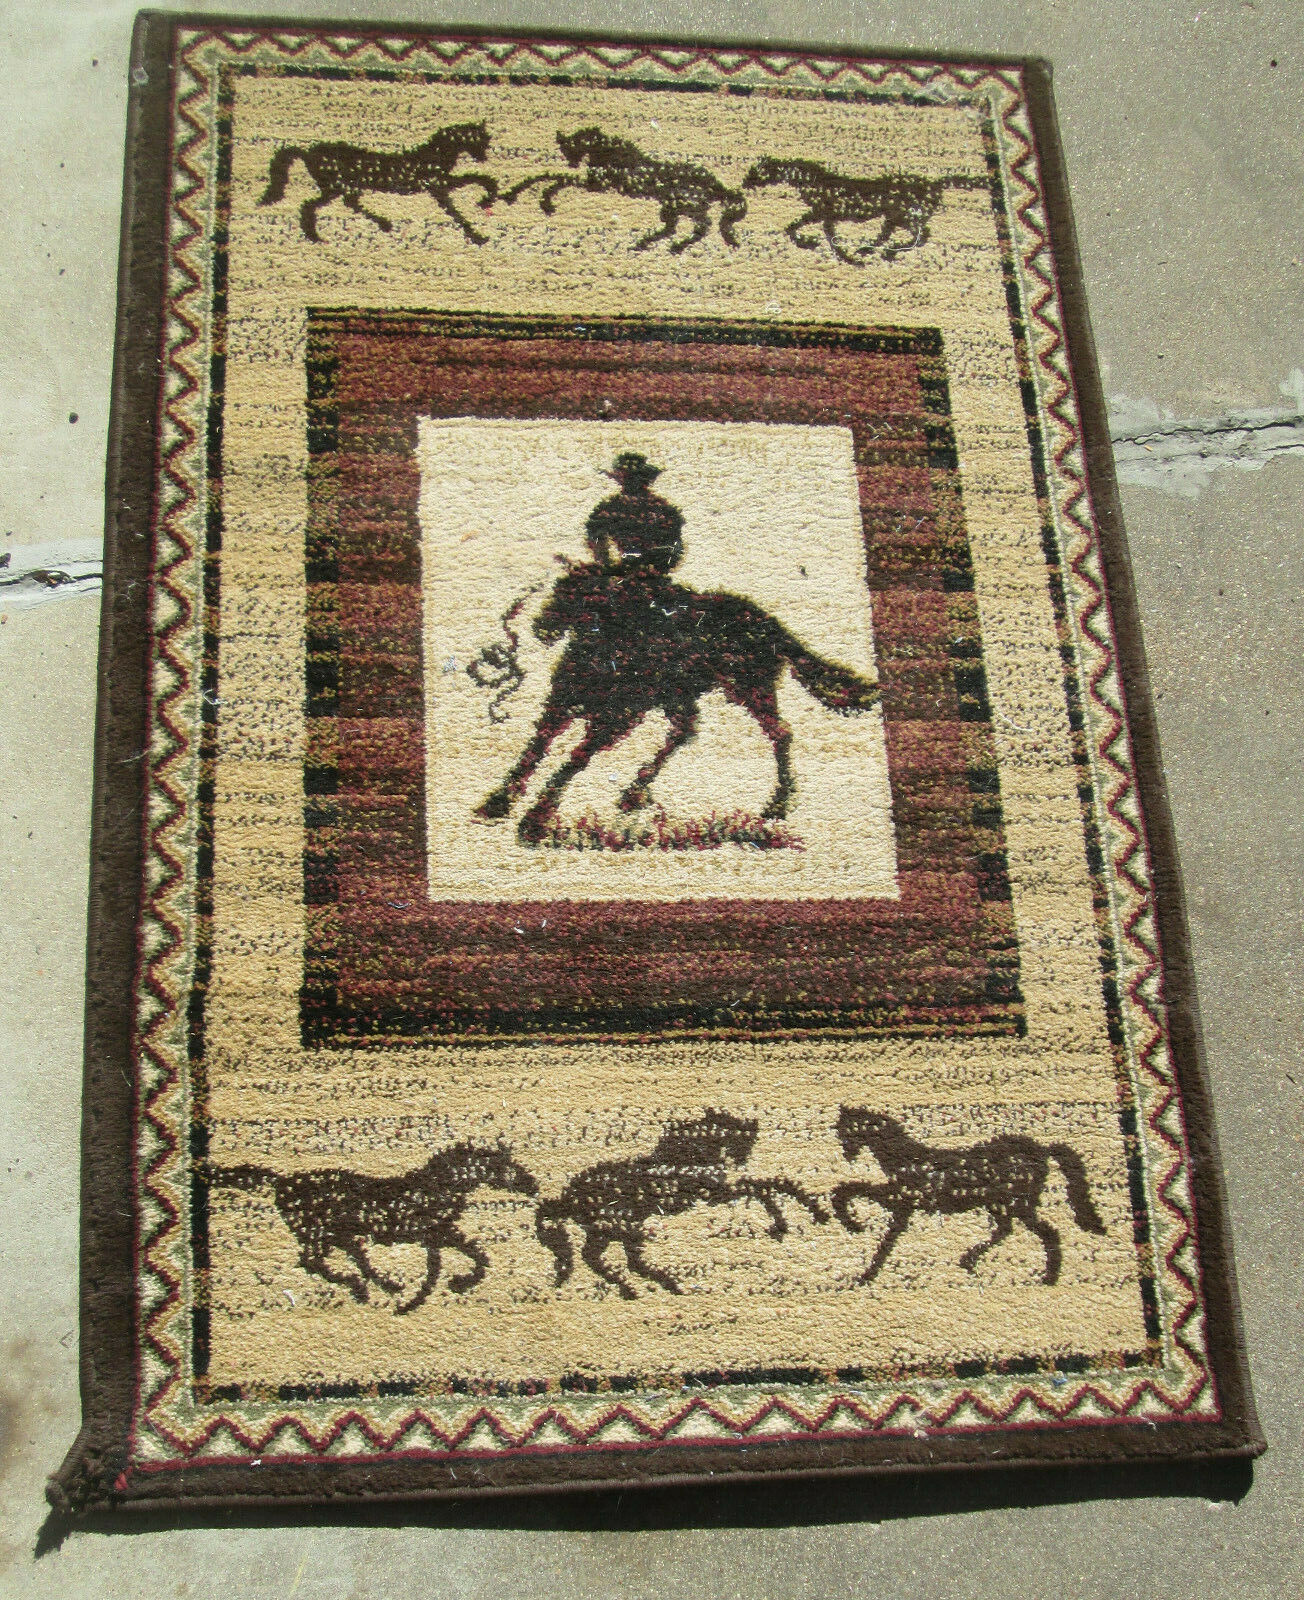 22" X 30" DYNASTY COLLECTION BROWN RUG WESTERN HORSES RIDERS RUNNER MADE TURKEY